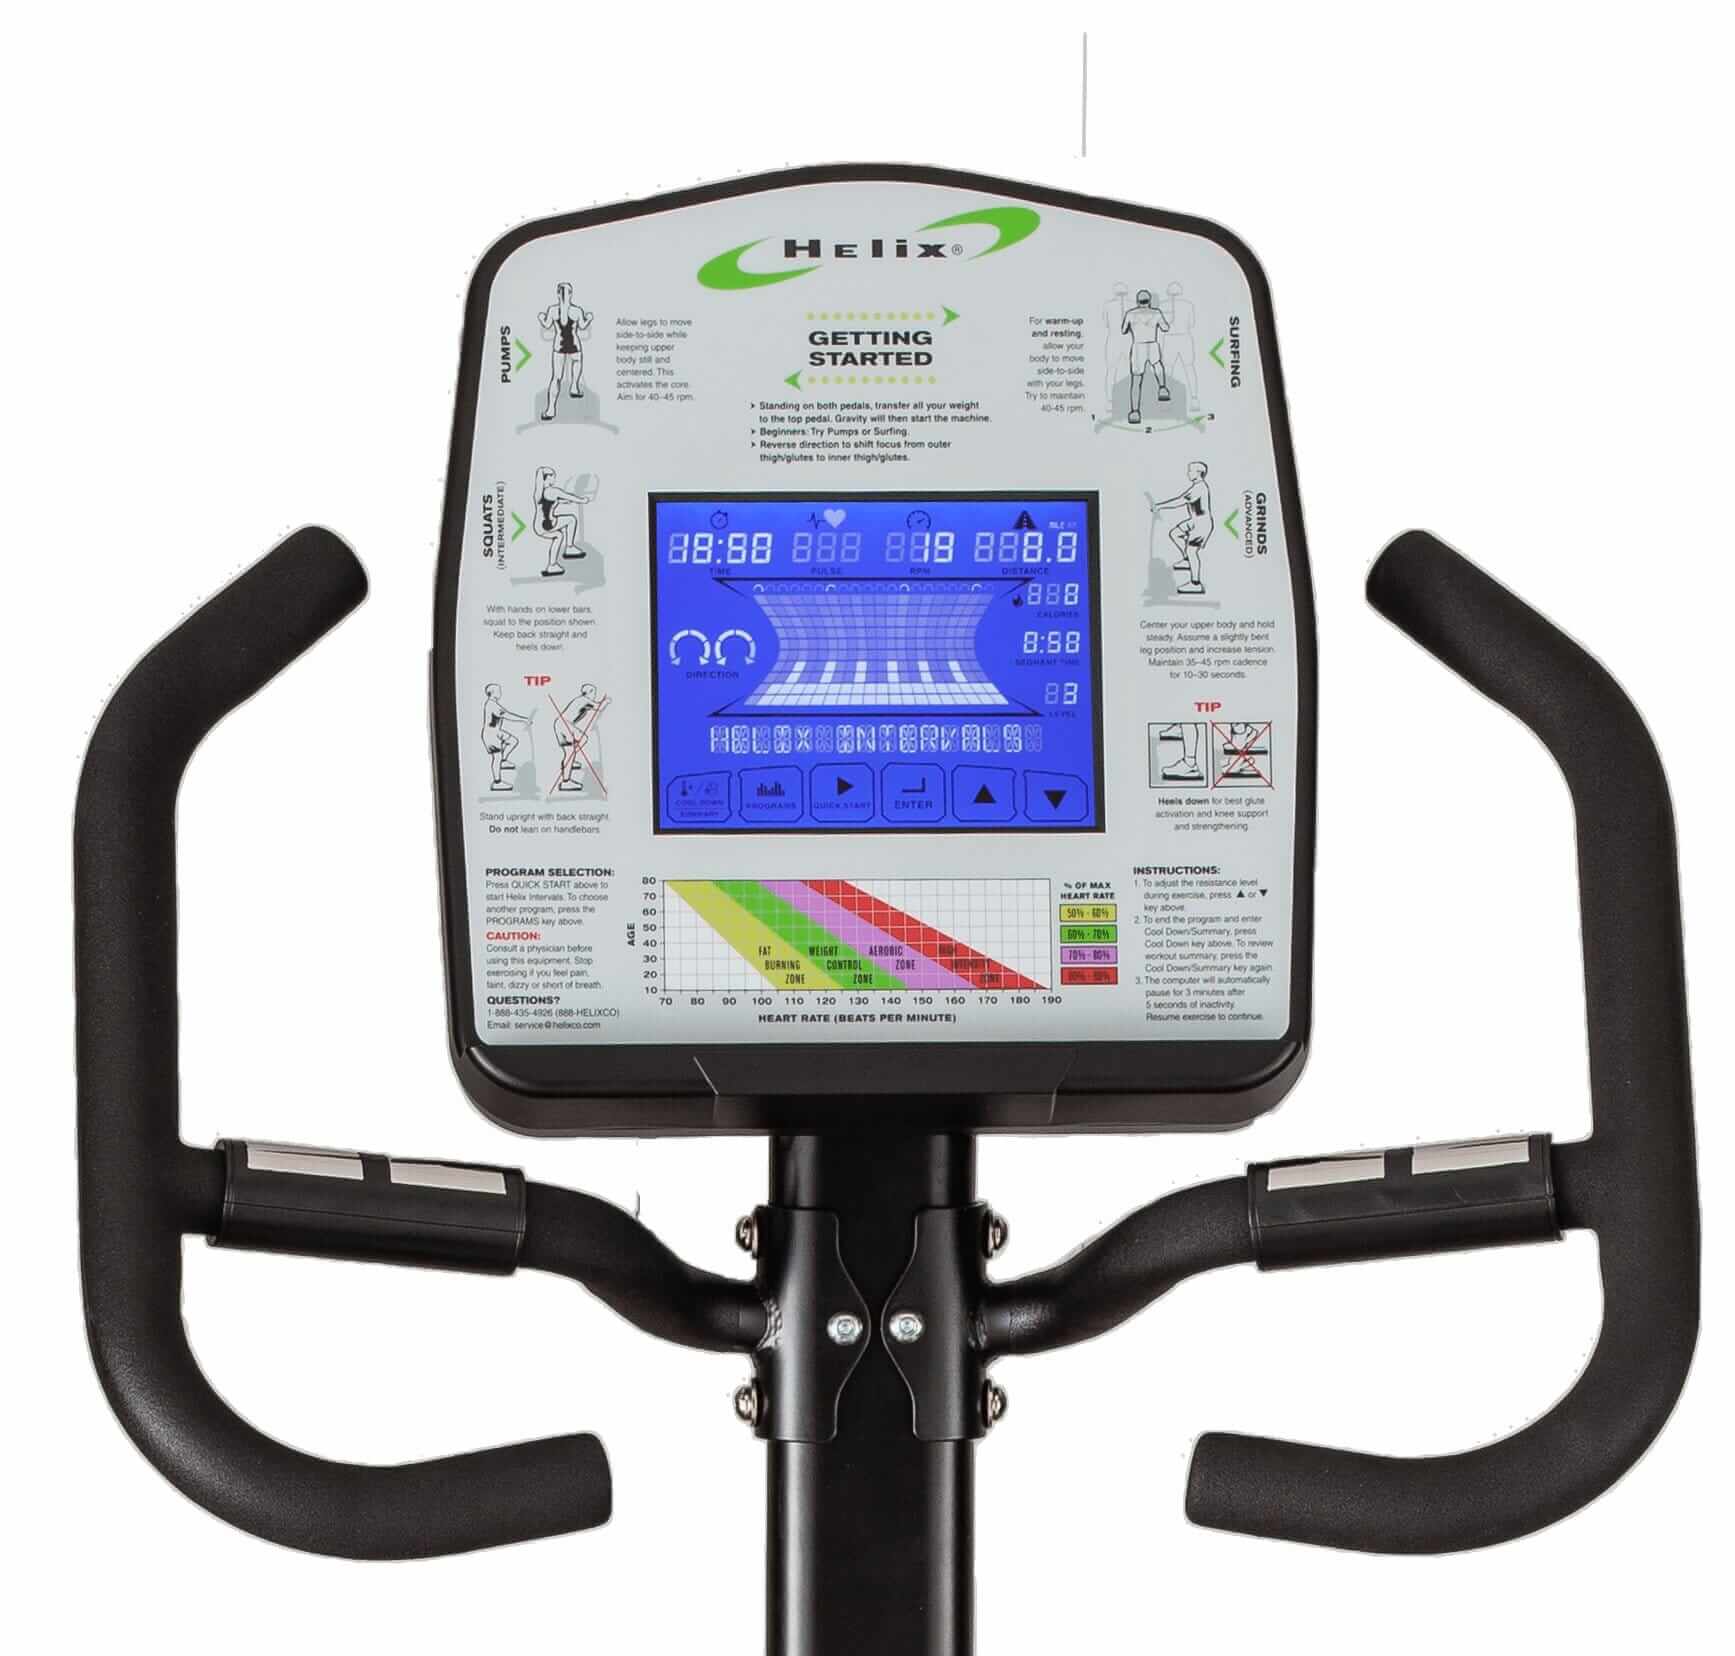 Do Elliptical Machines Give You a Good Workout? How Good?